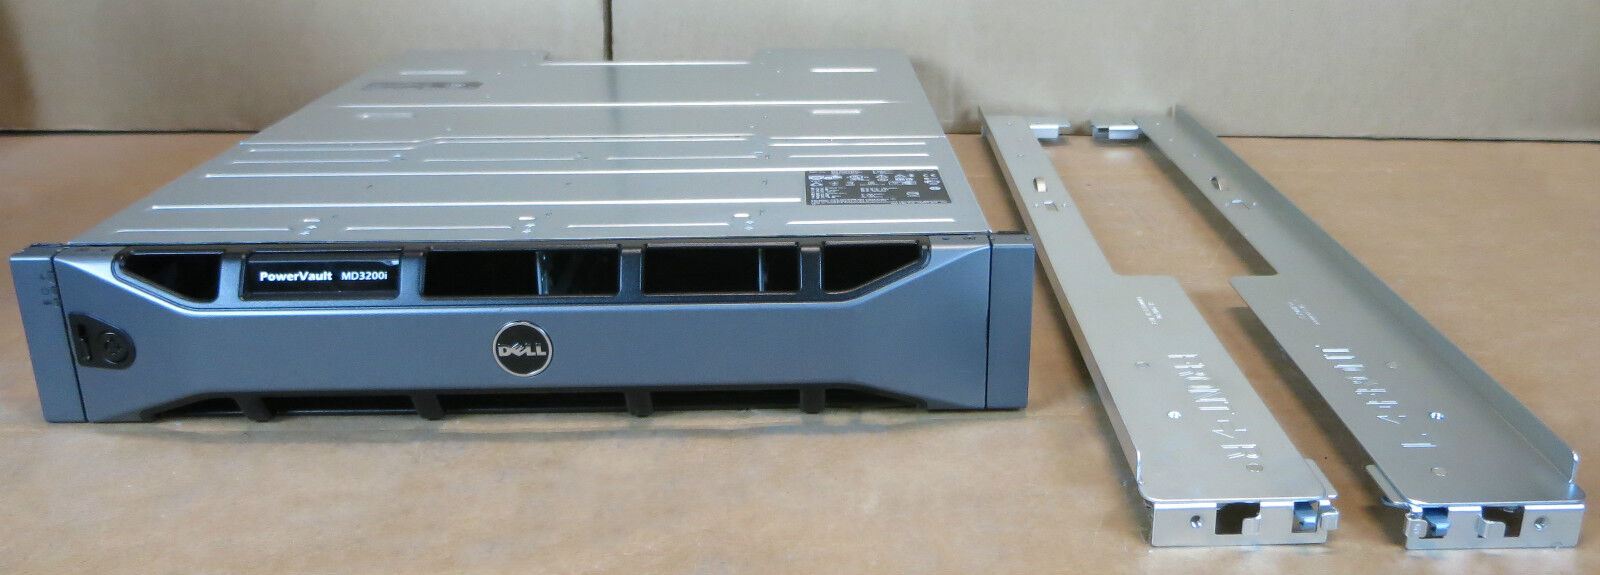 Large special price Dell New arrival PowerVault MD3200i iSCSI SAN 12x3.5